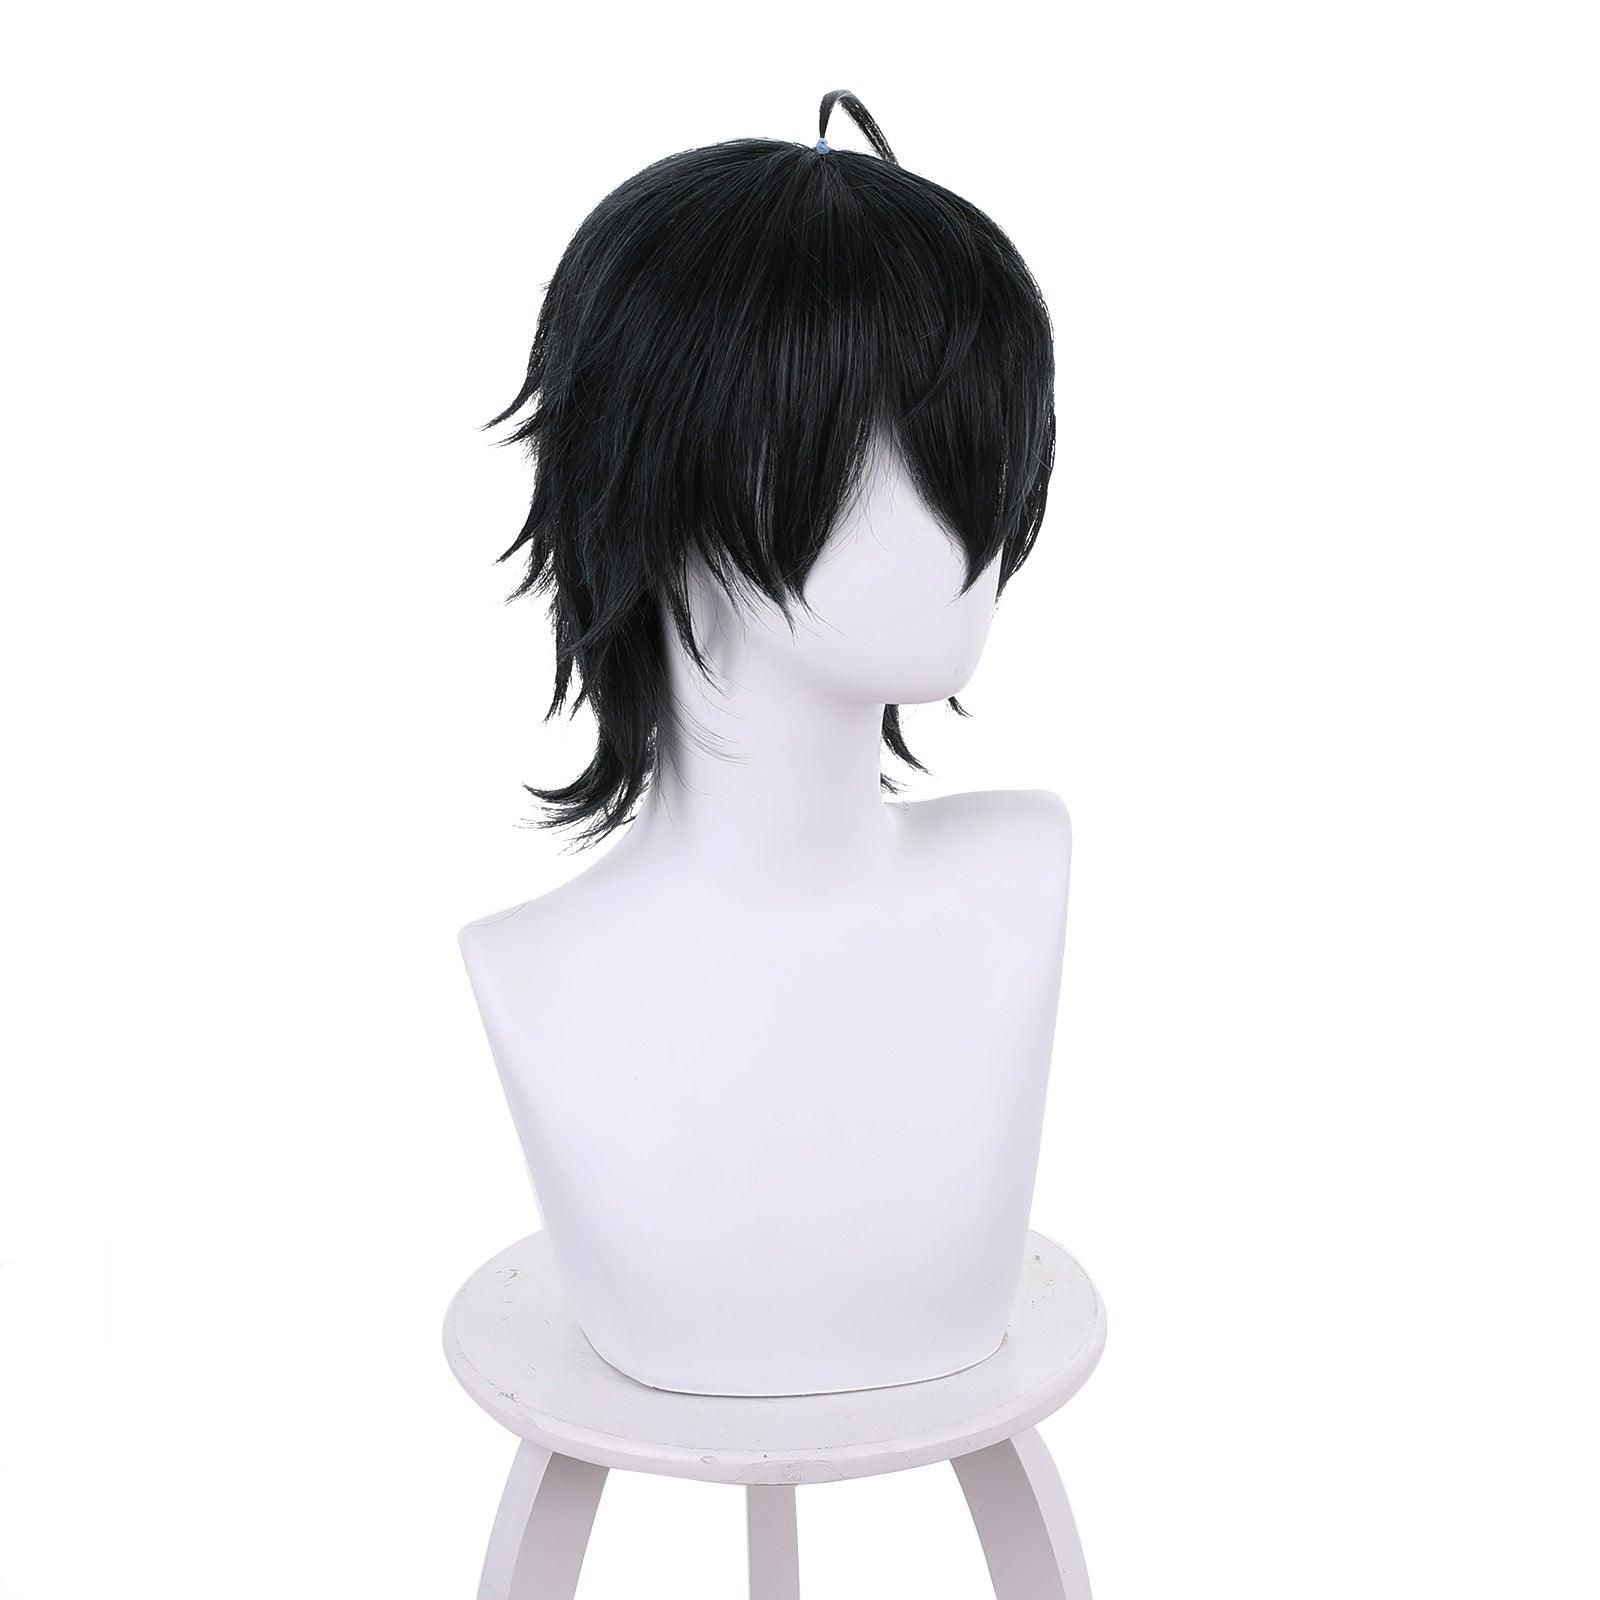 coscrew Anime Cosplay Wigs for TAKT ASAHINA black Cosplay Wig of takt op.Destiny 529D - coscrew